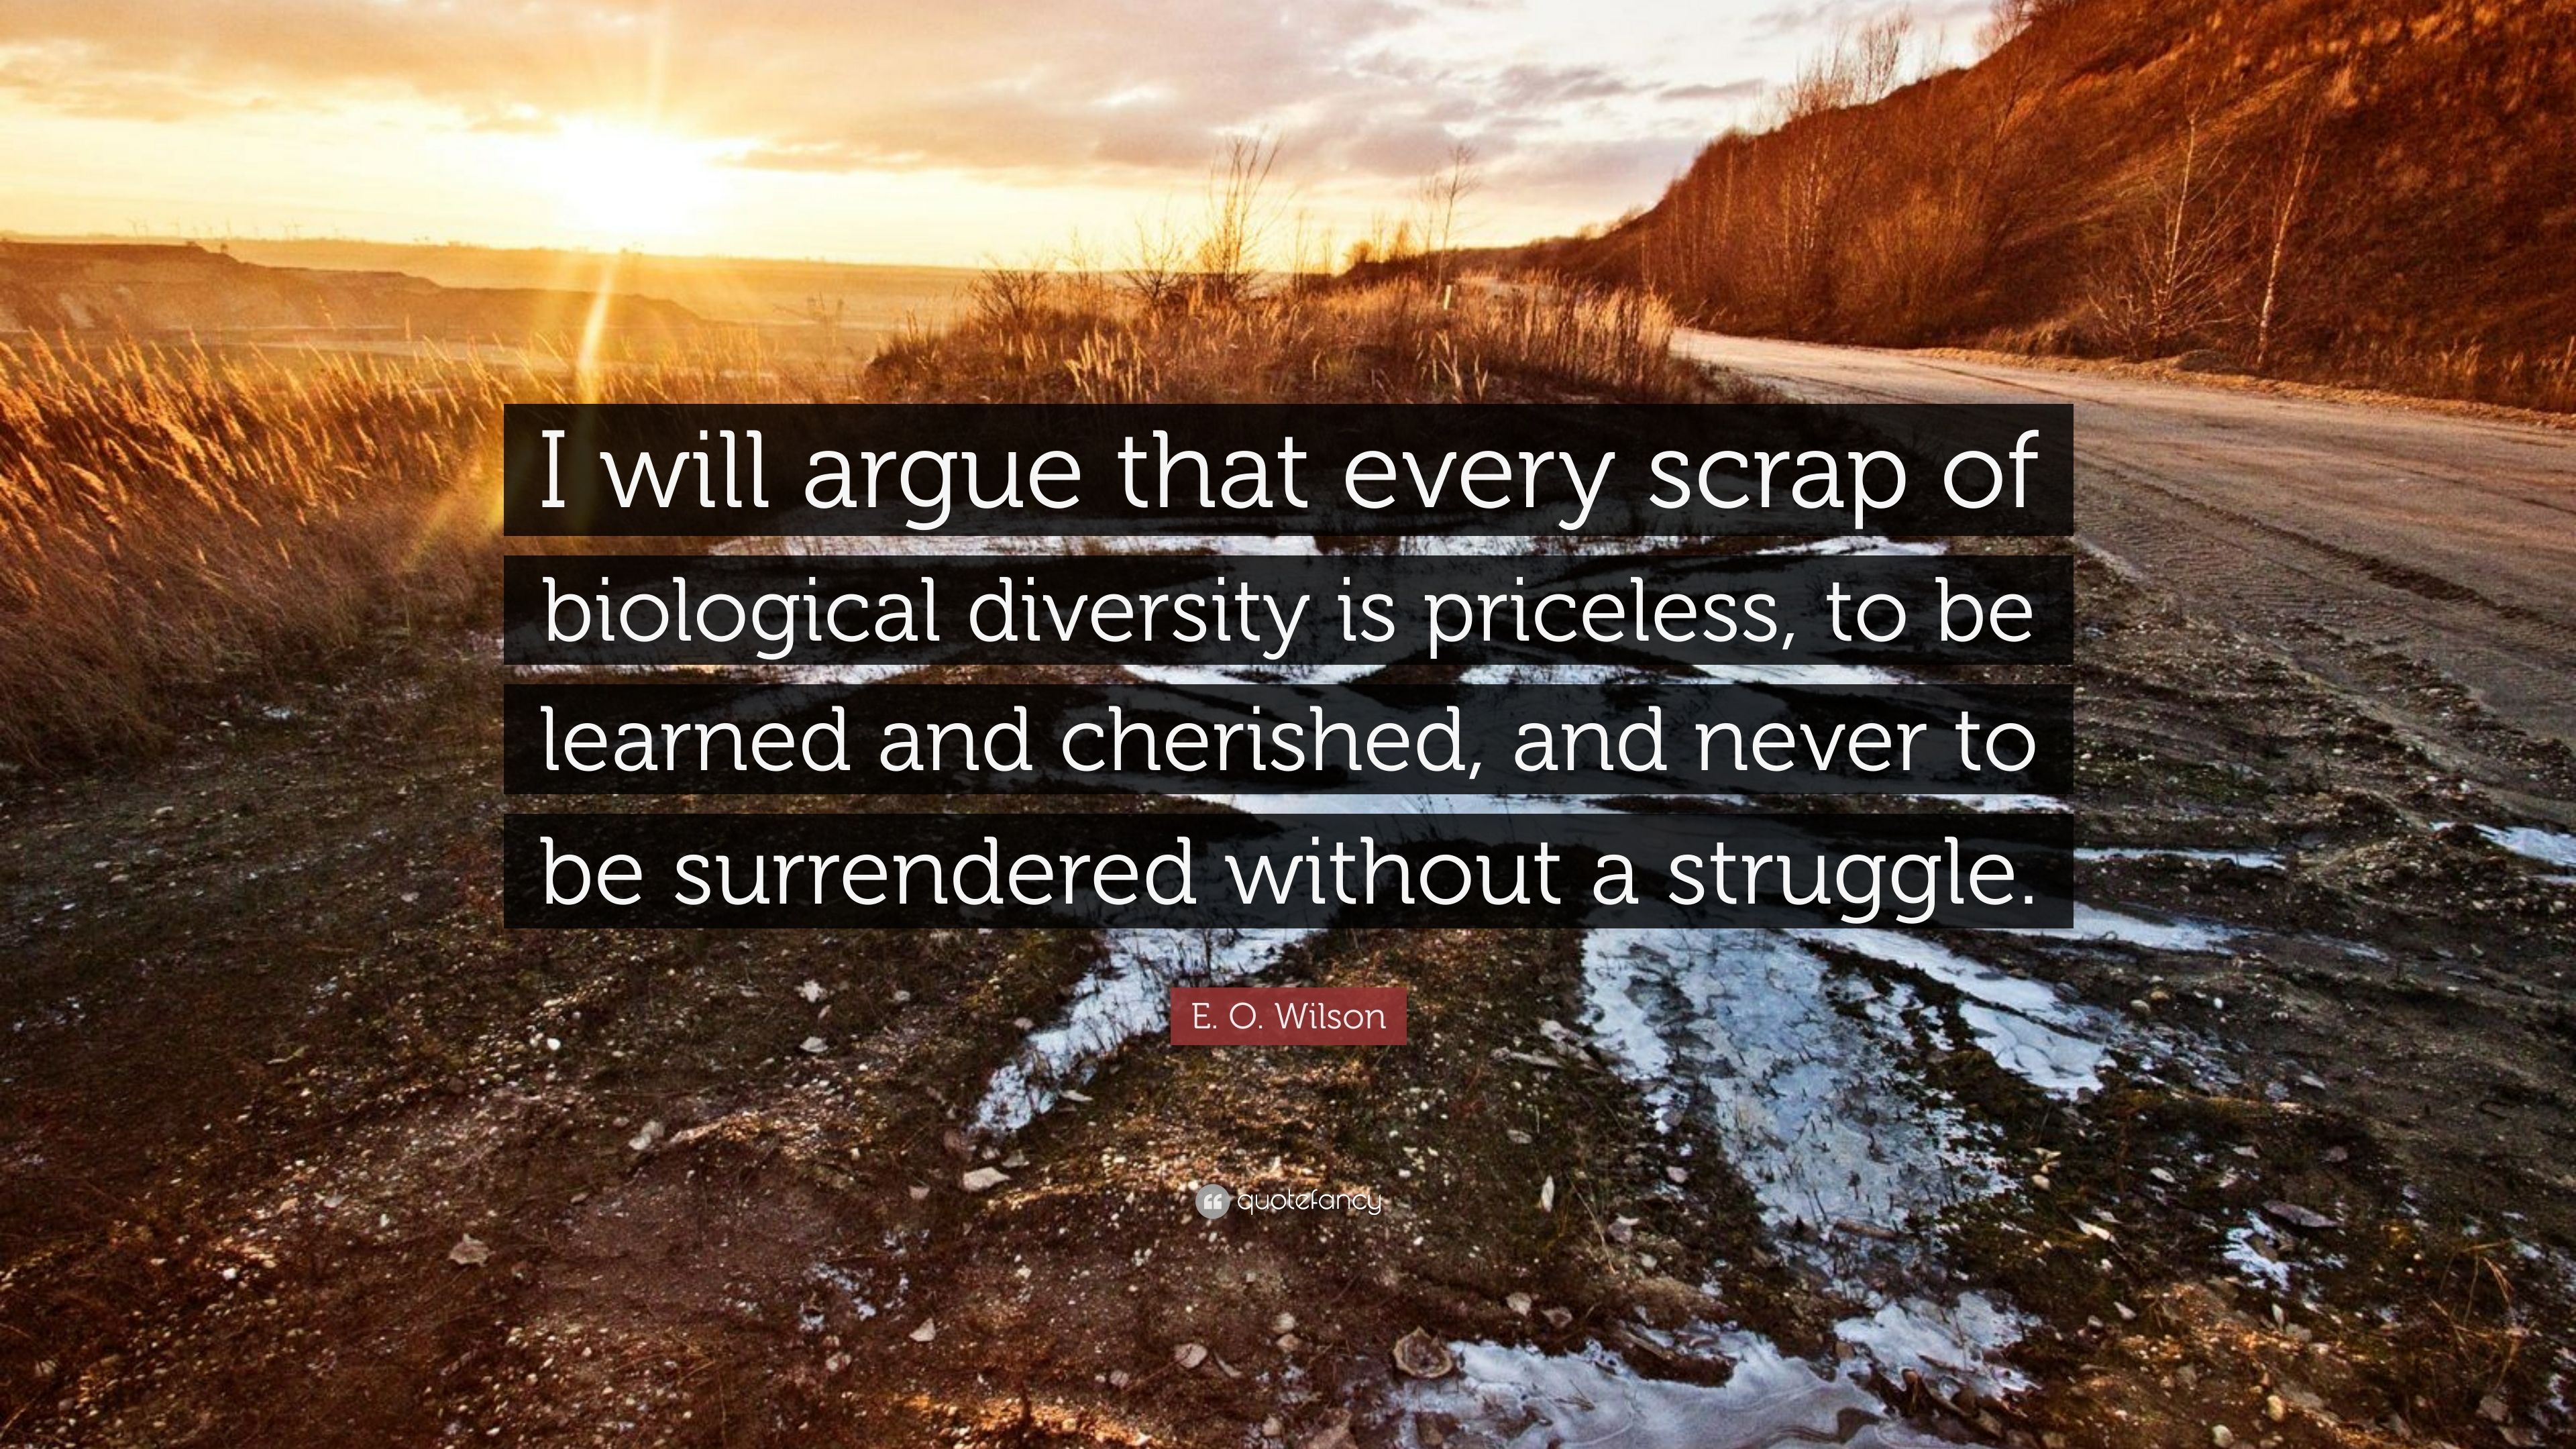 E. O. Wilson Quote: “I will argue that every scrap of biological